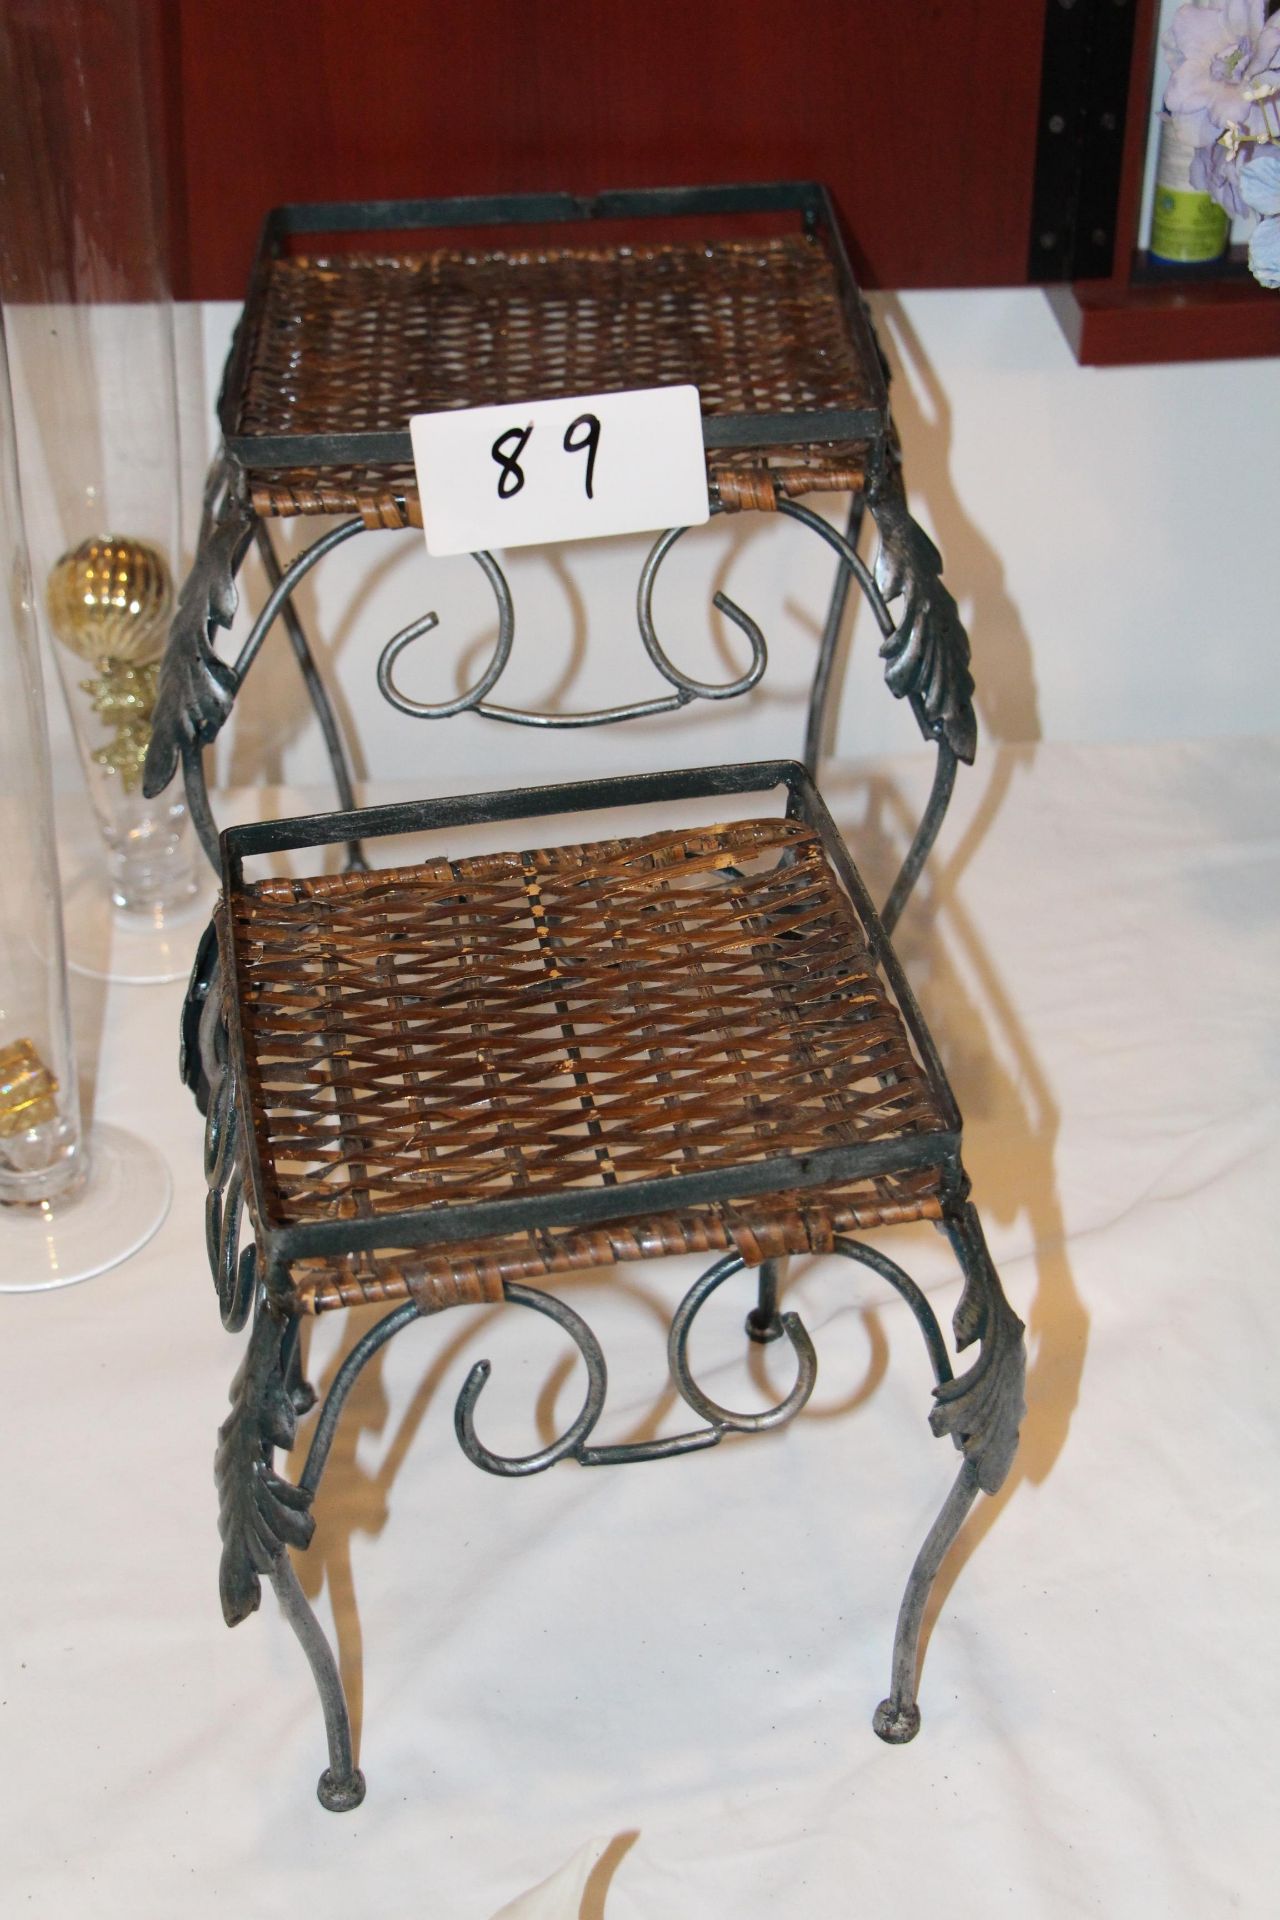 Lot 2 wrought iron stands w/ wicker top